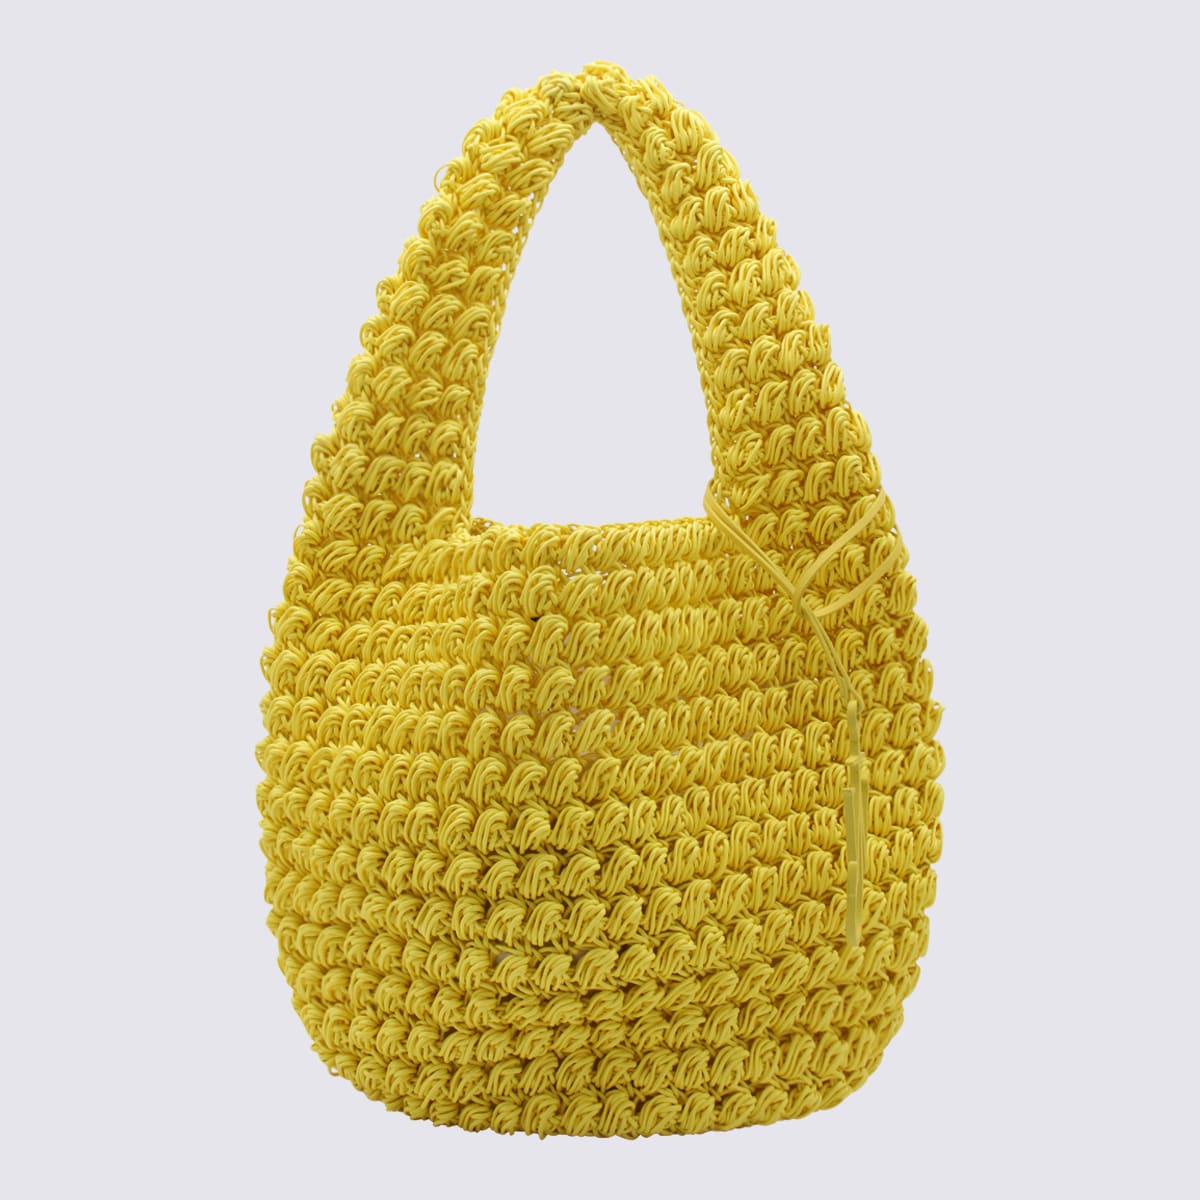 Jw Anderson Large Popcorn Basket - Tote Bag In Yellow